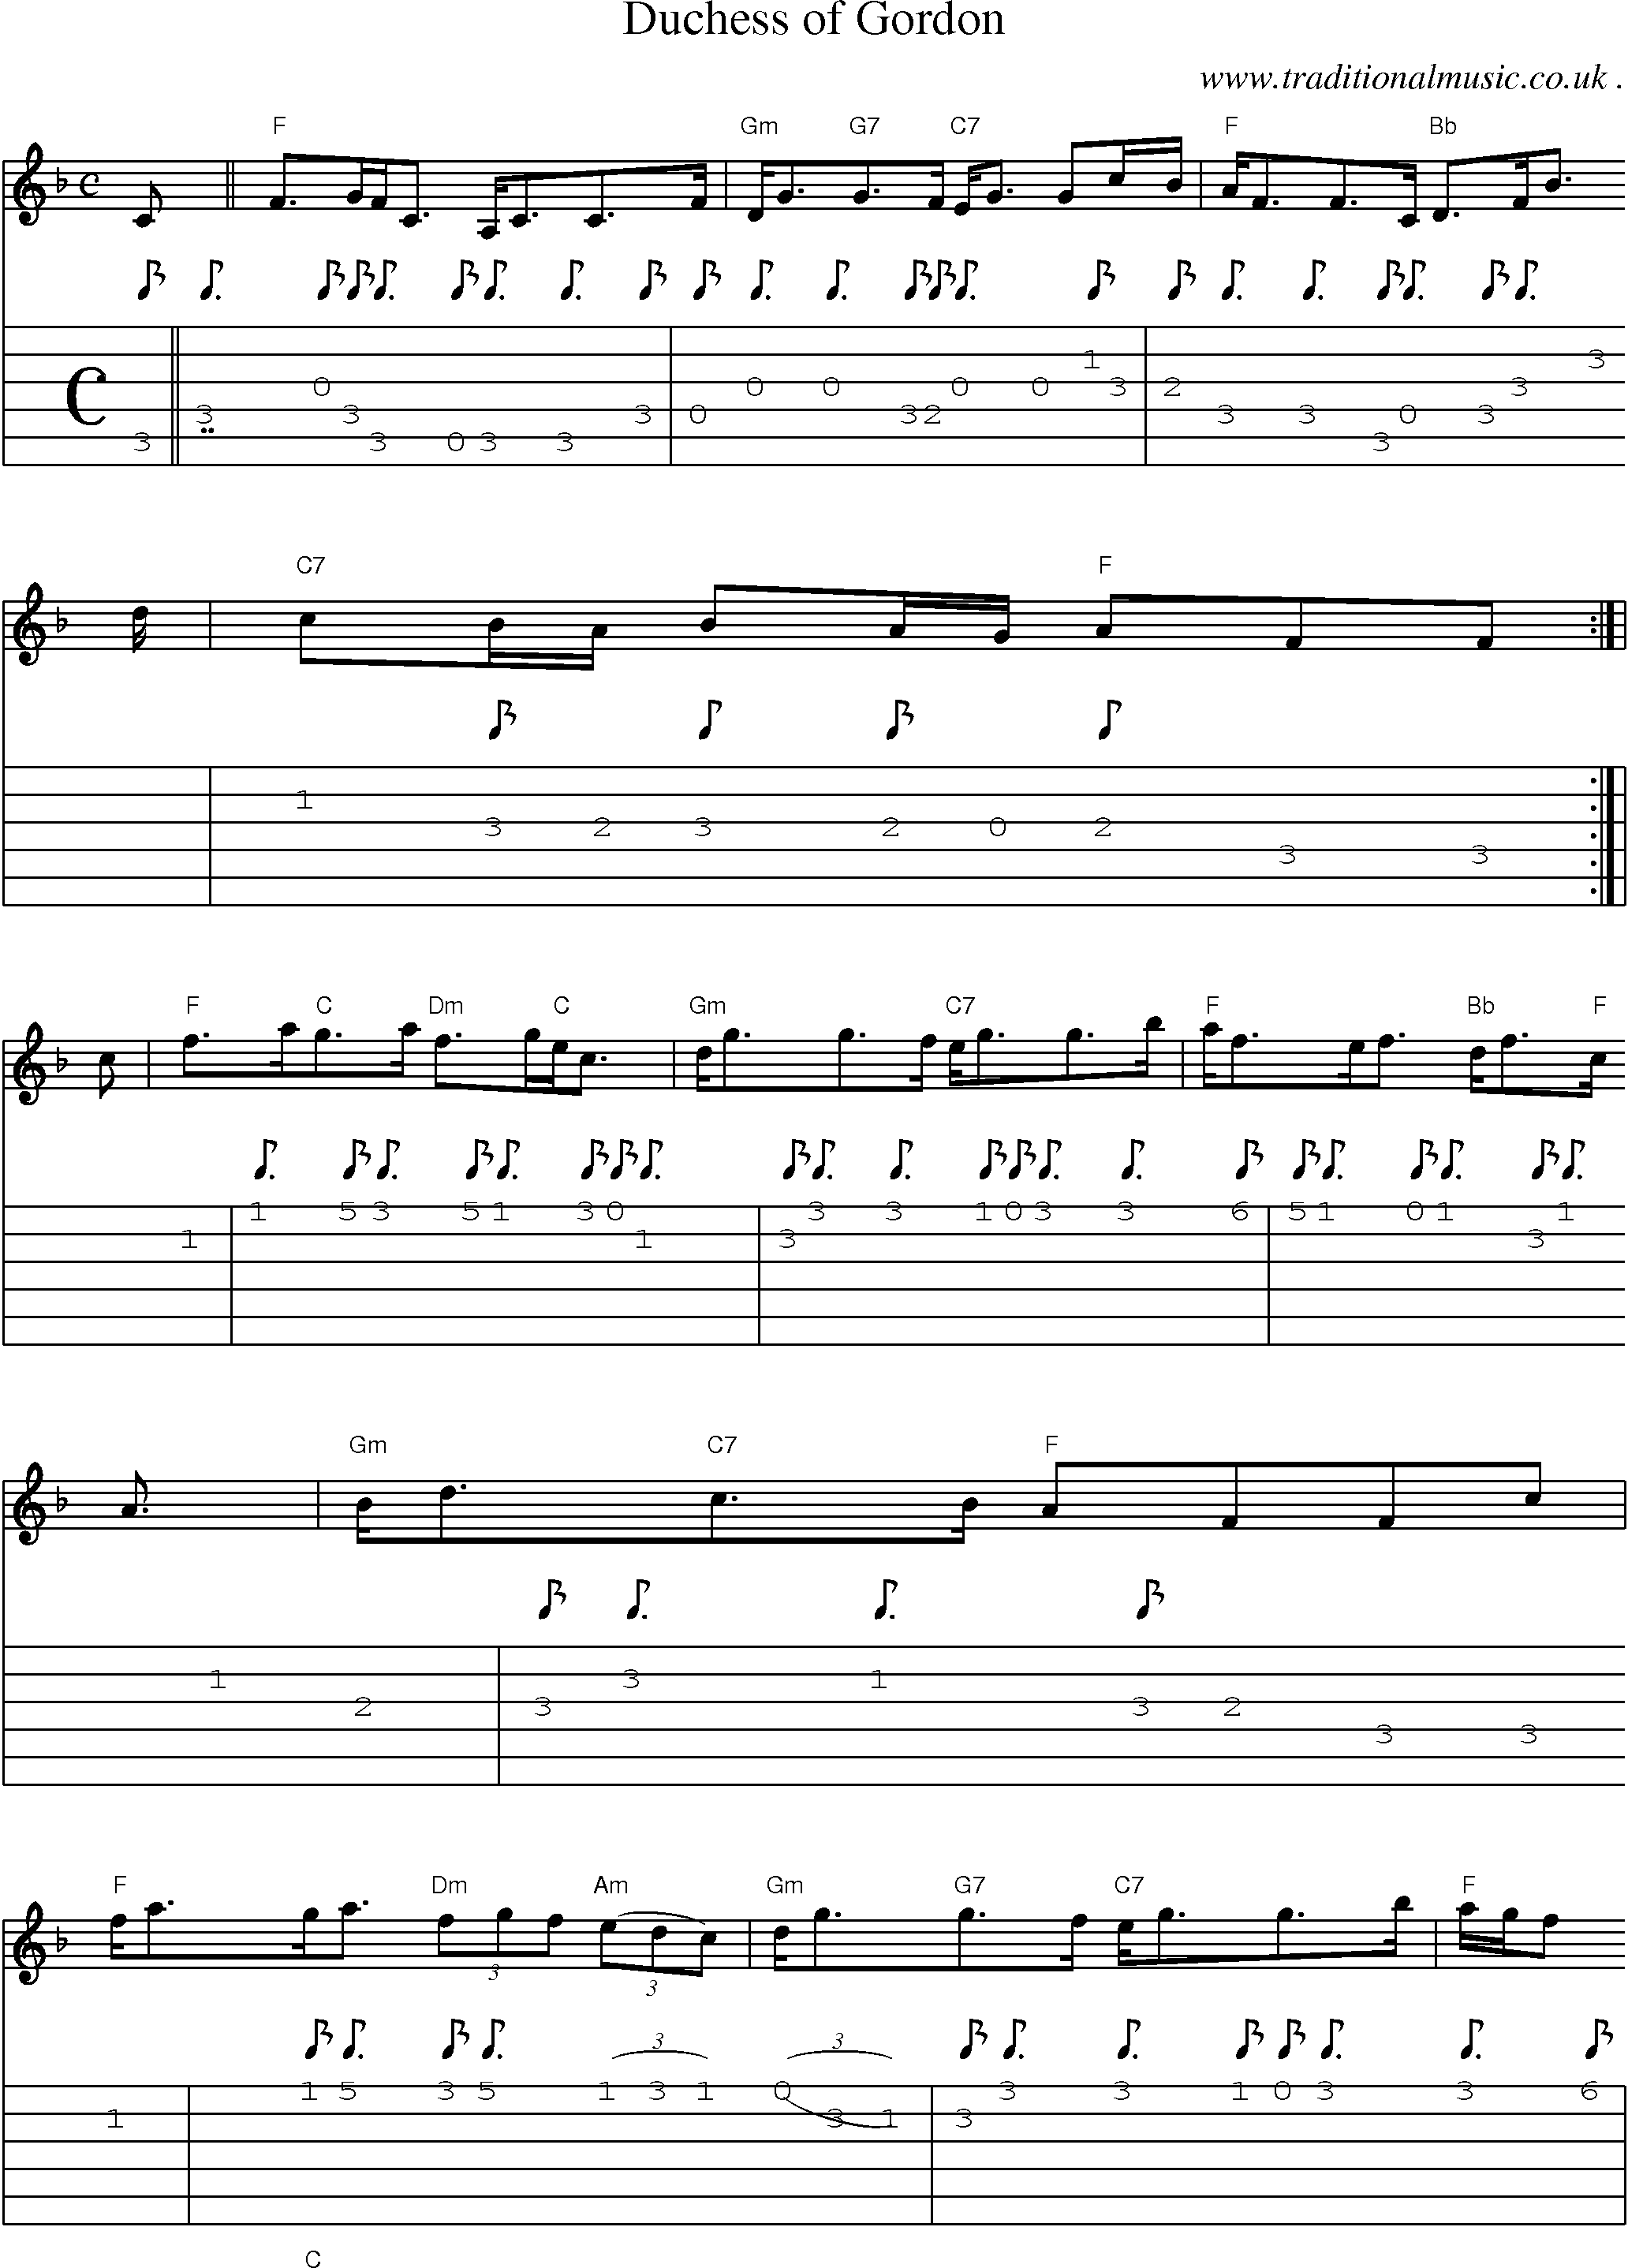 Sheet-music  score, Chords and Guitar Tabs for Duchess Of Gordon